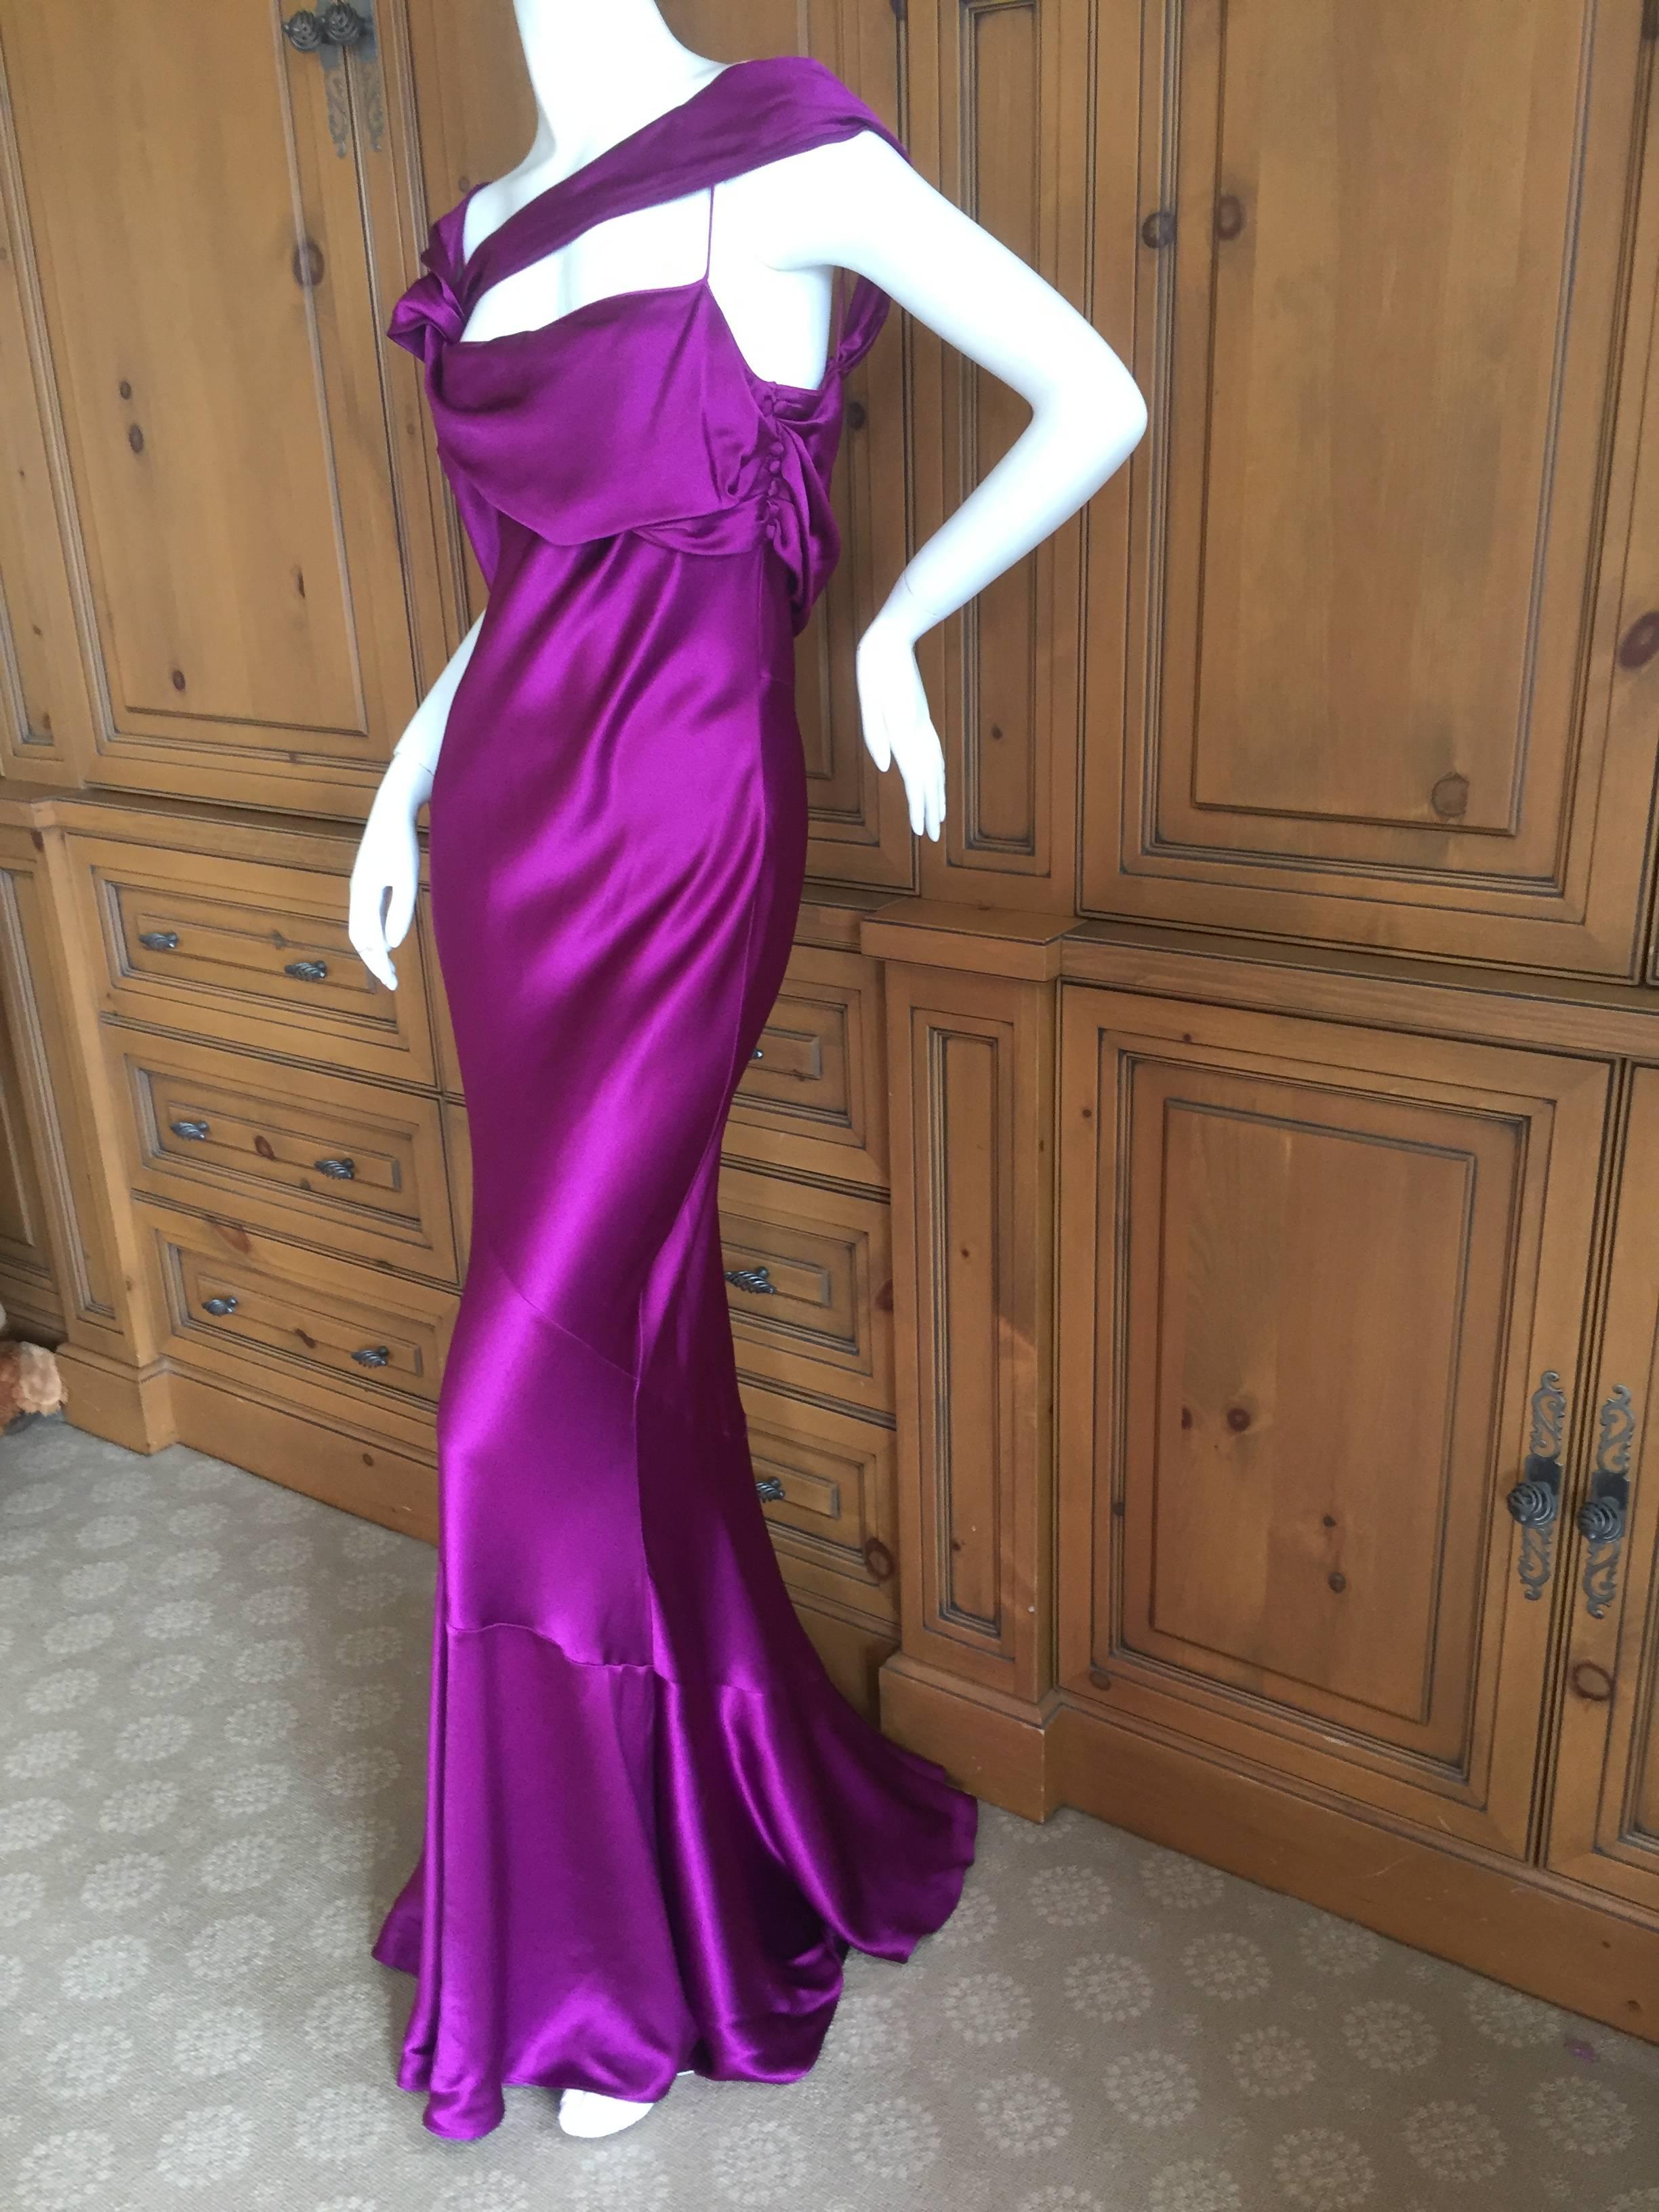 Sensation purple charmeuse evening dress by John Galliano.
This is sensational, the photos don't do it justice.
This is very long, to pool along the floor, with a train.
SIze 44
Bust 40